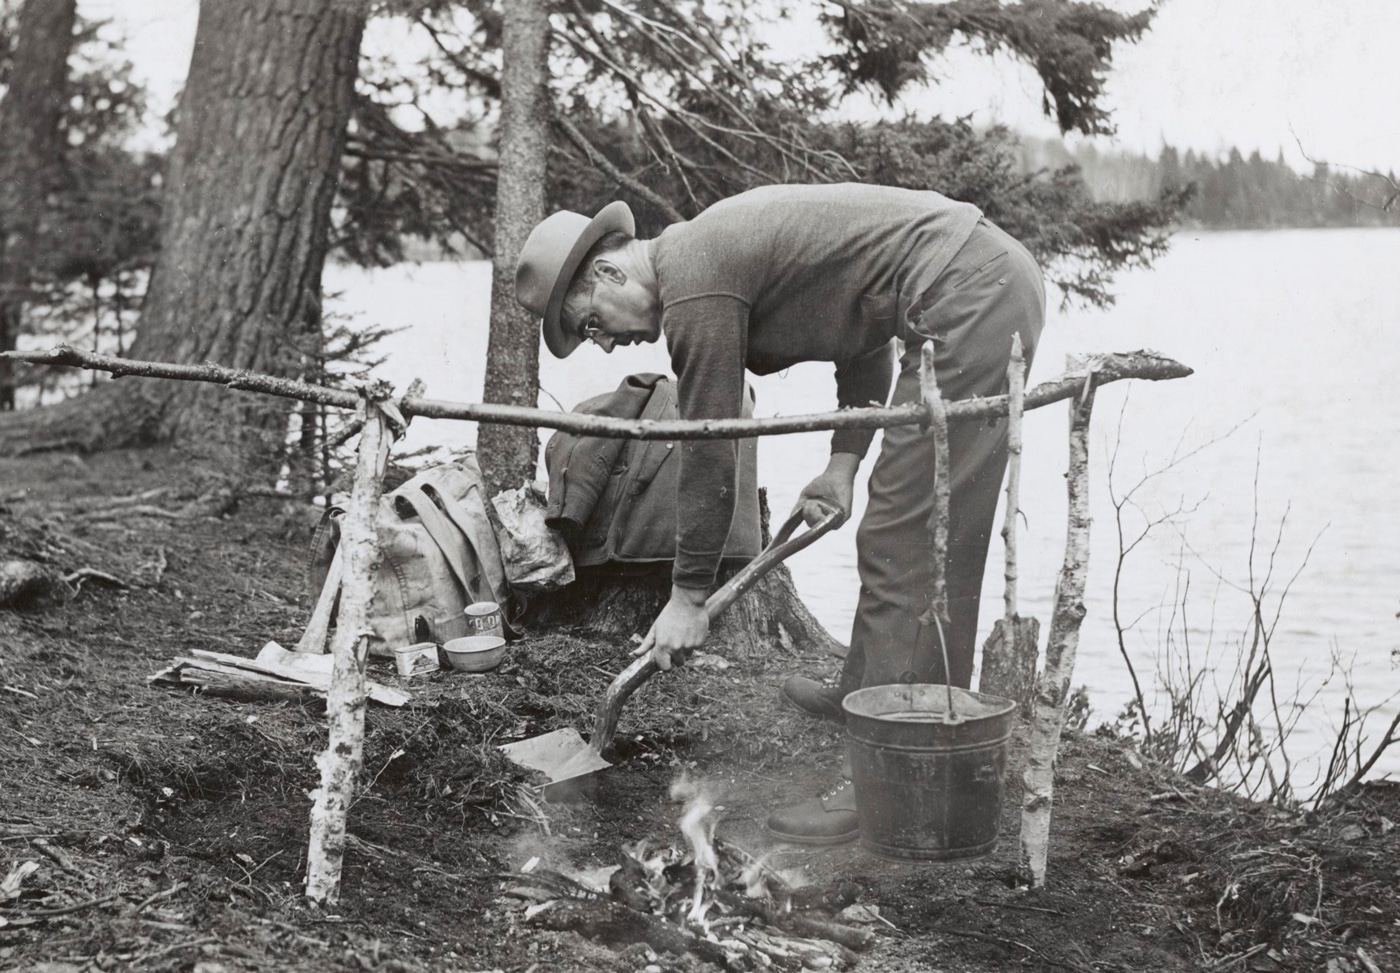 In this 1941 publicity photo, a National Parks ranger demonstrates campfire safety when camping.